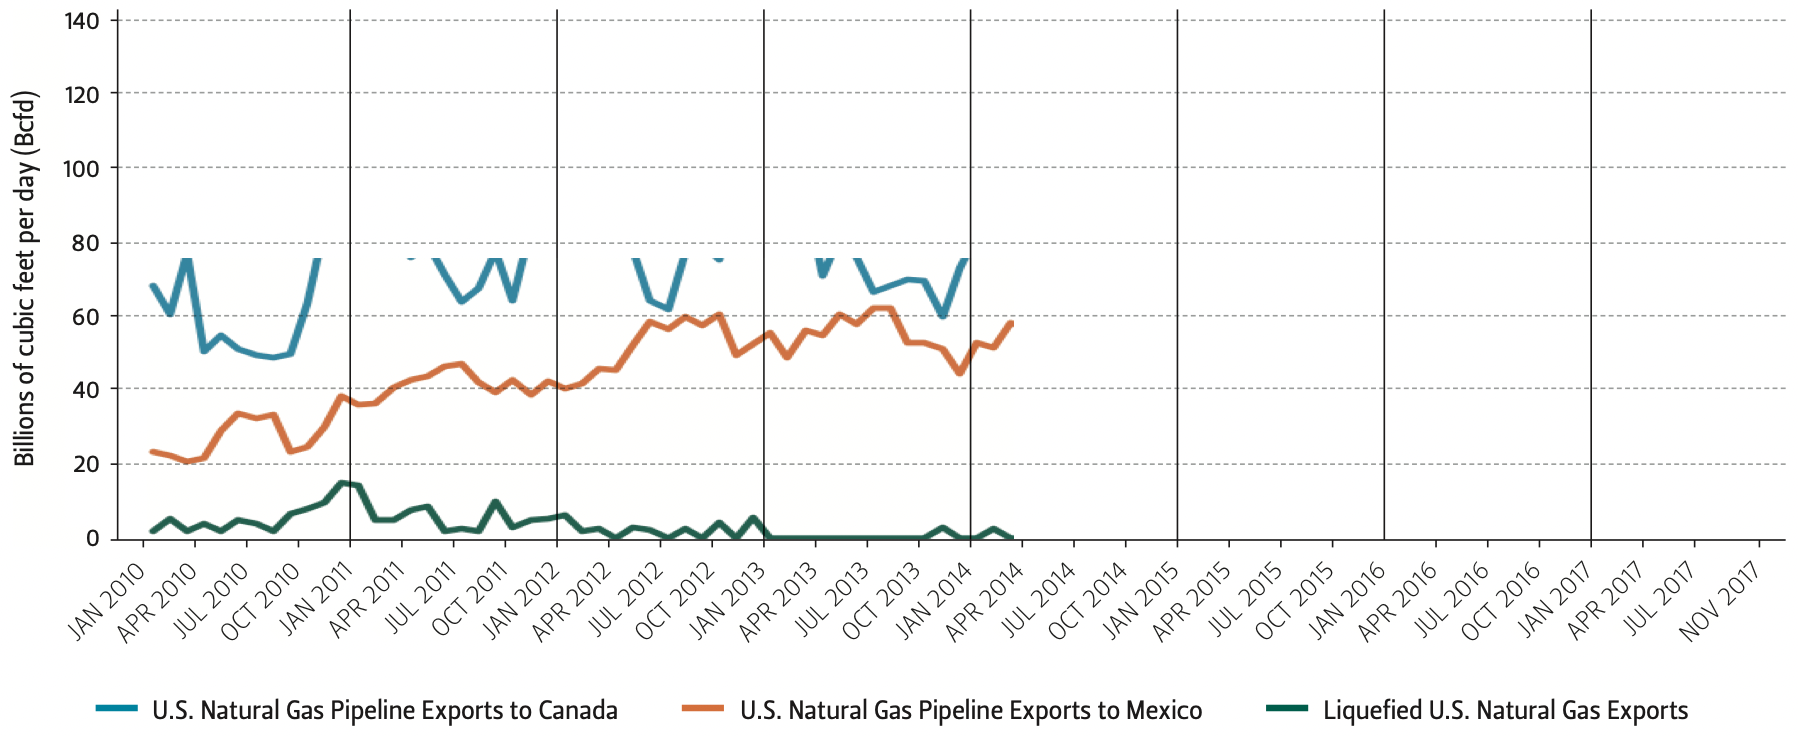 This graph compares U.S. natural gas exports over time.